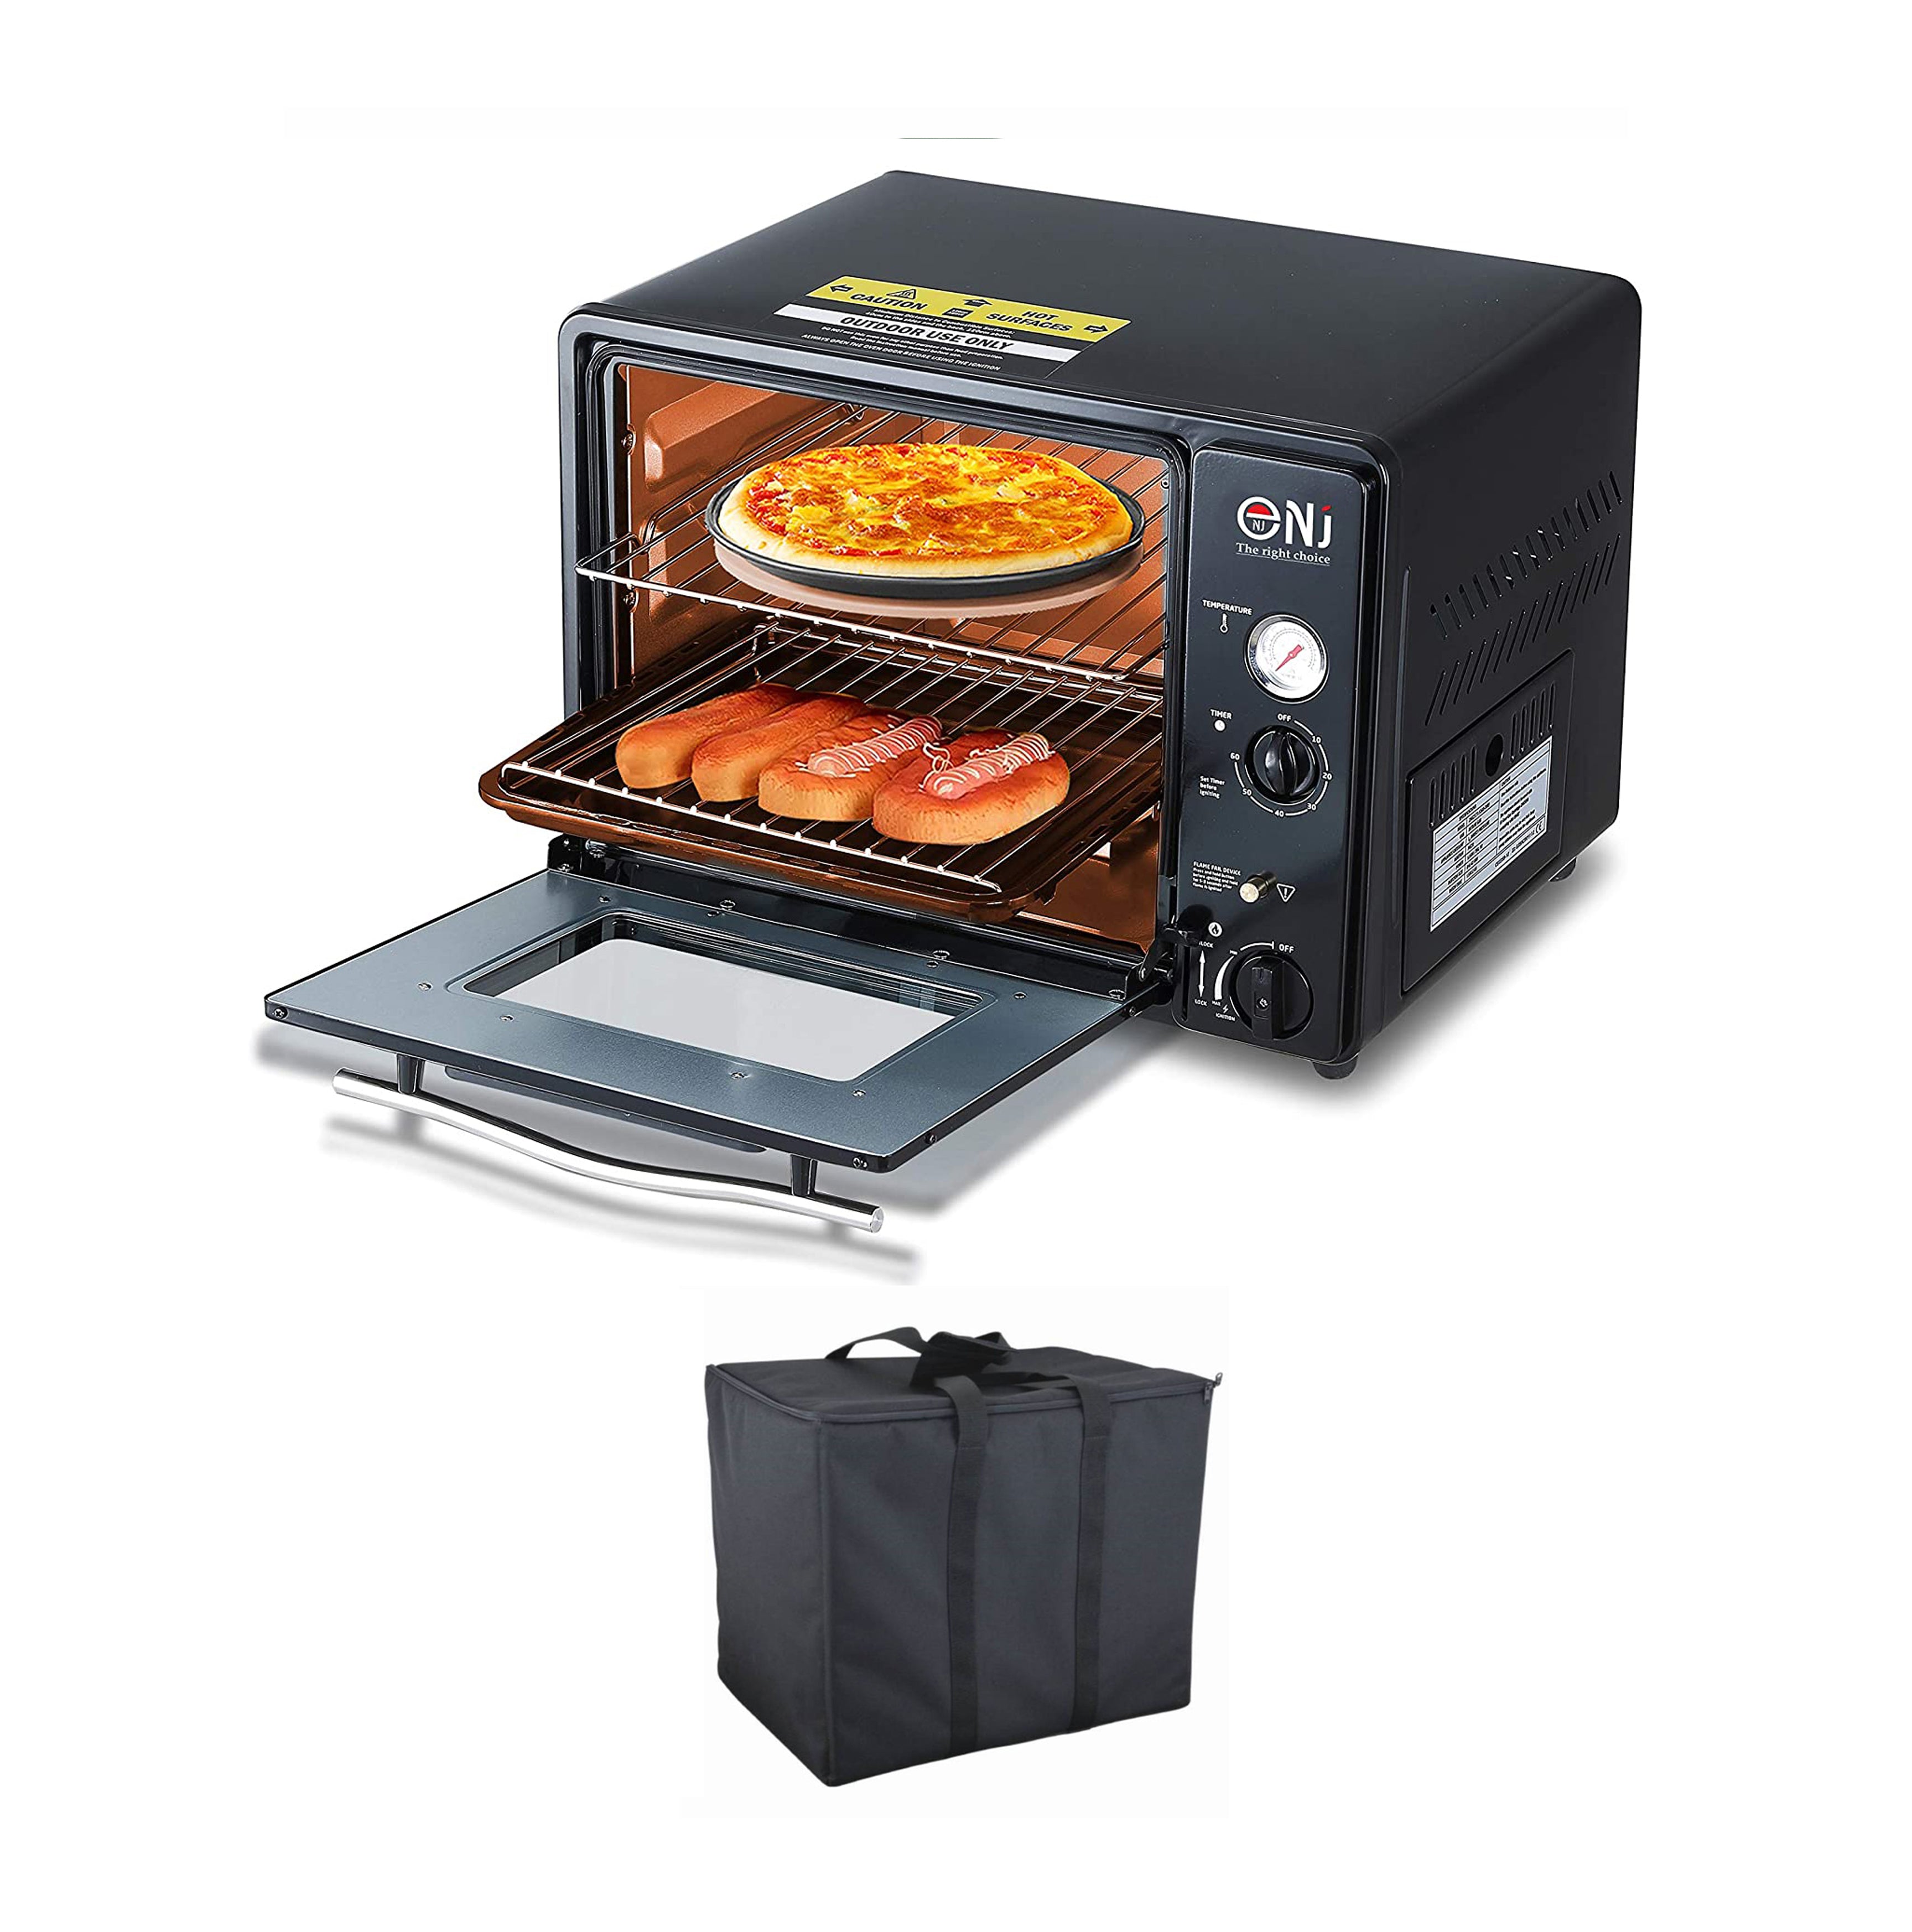  Portable Oven, Portable Microwave 302°F for Road  Trip/Camping/Picnic/House Party for Truck Drivers Couriers Business  Travelers : Home & Kitchen